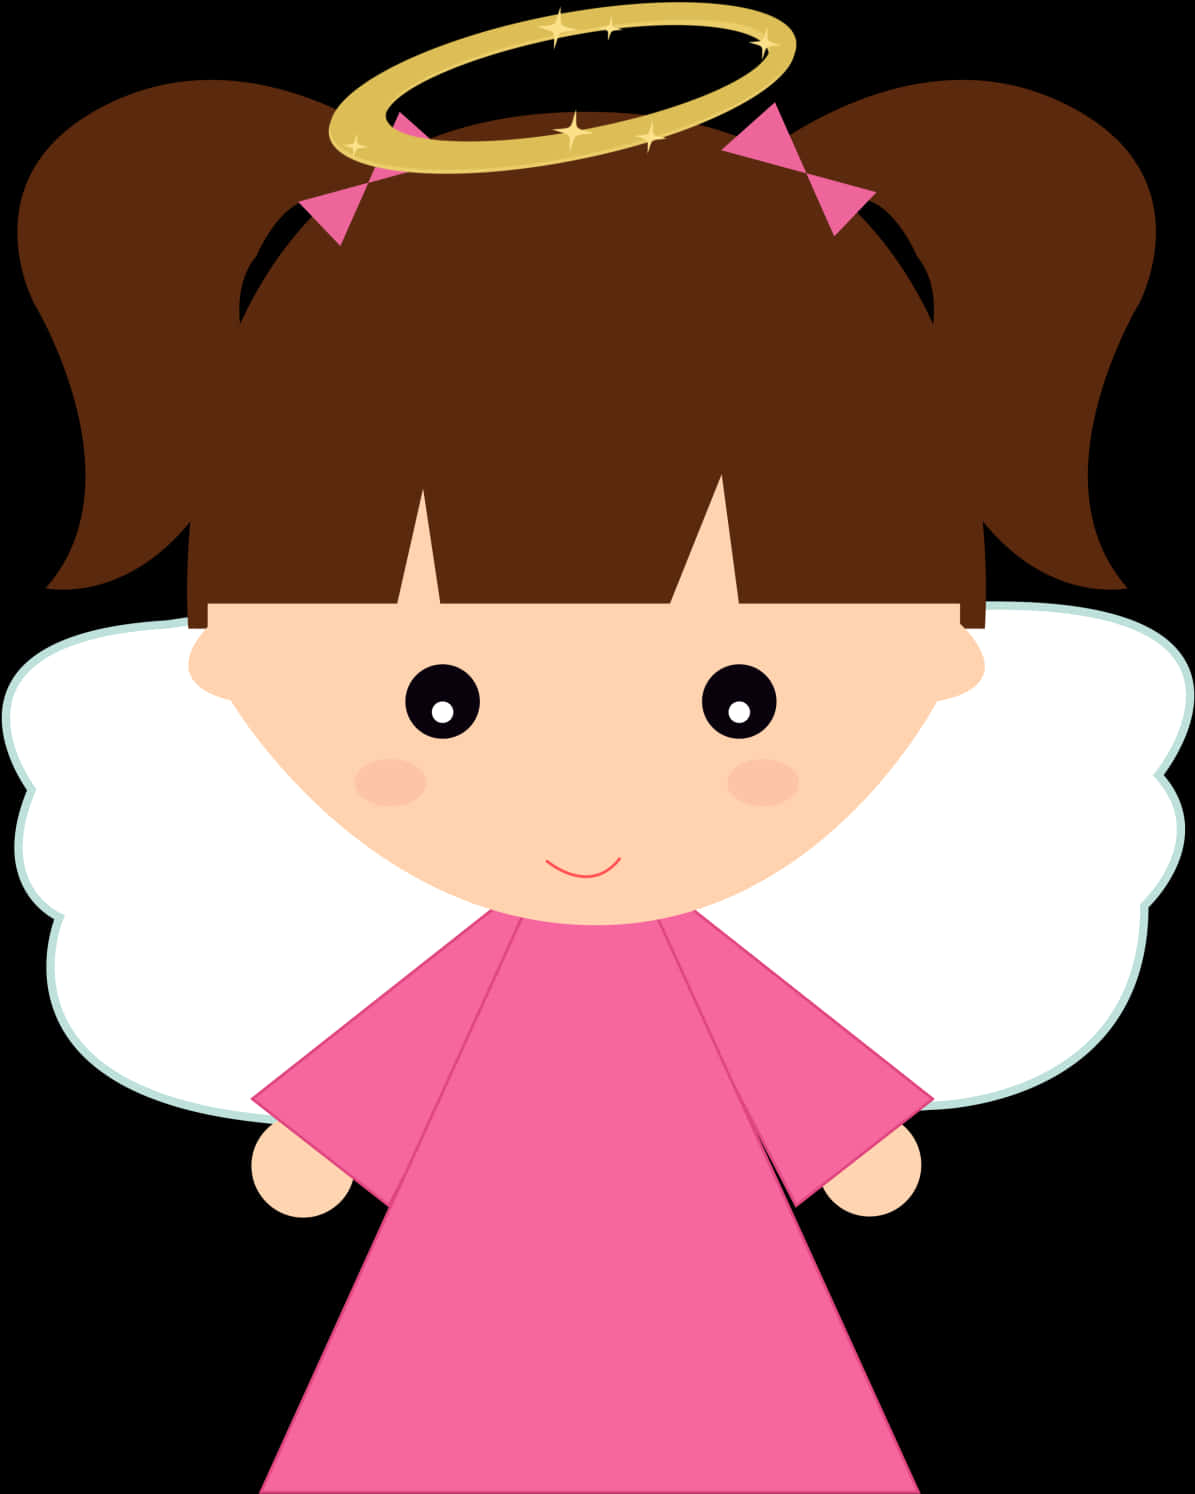 A Cartoon Of A Girl With Wings And A Crown